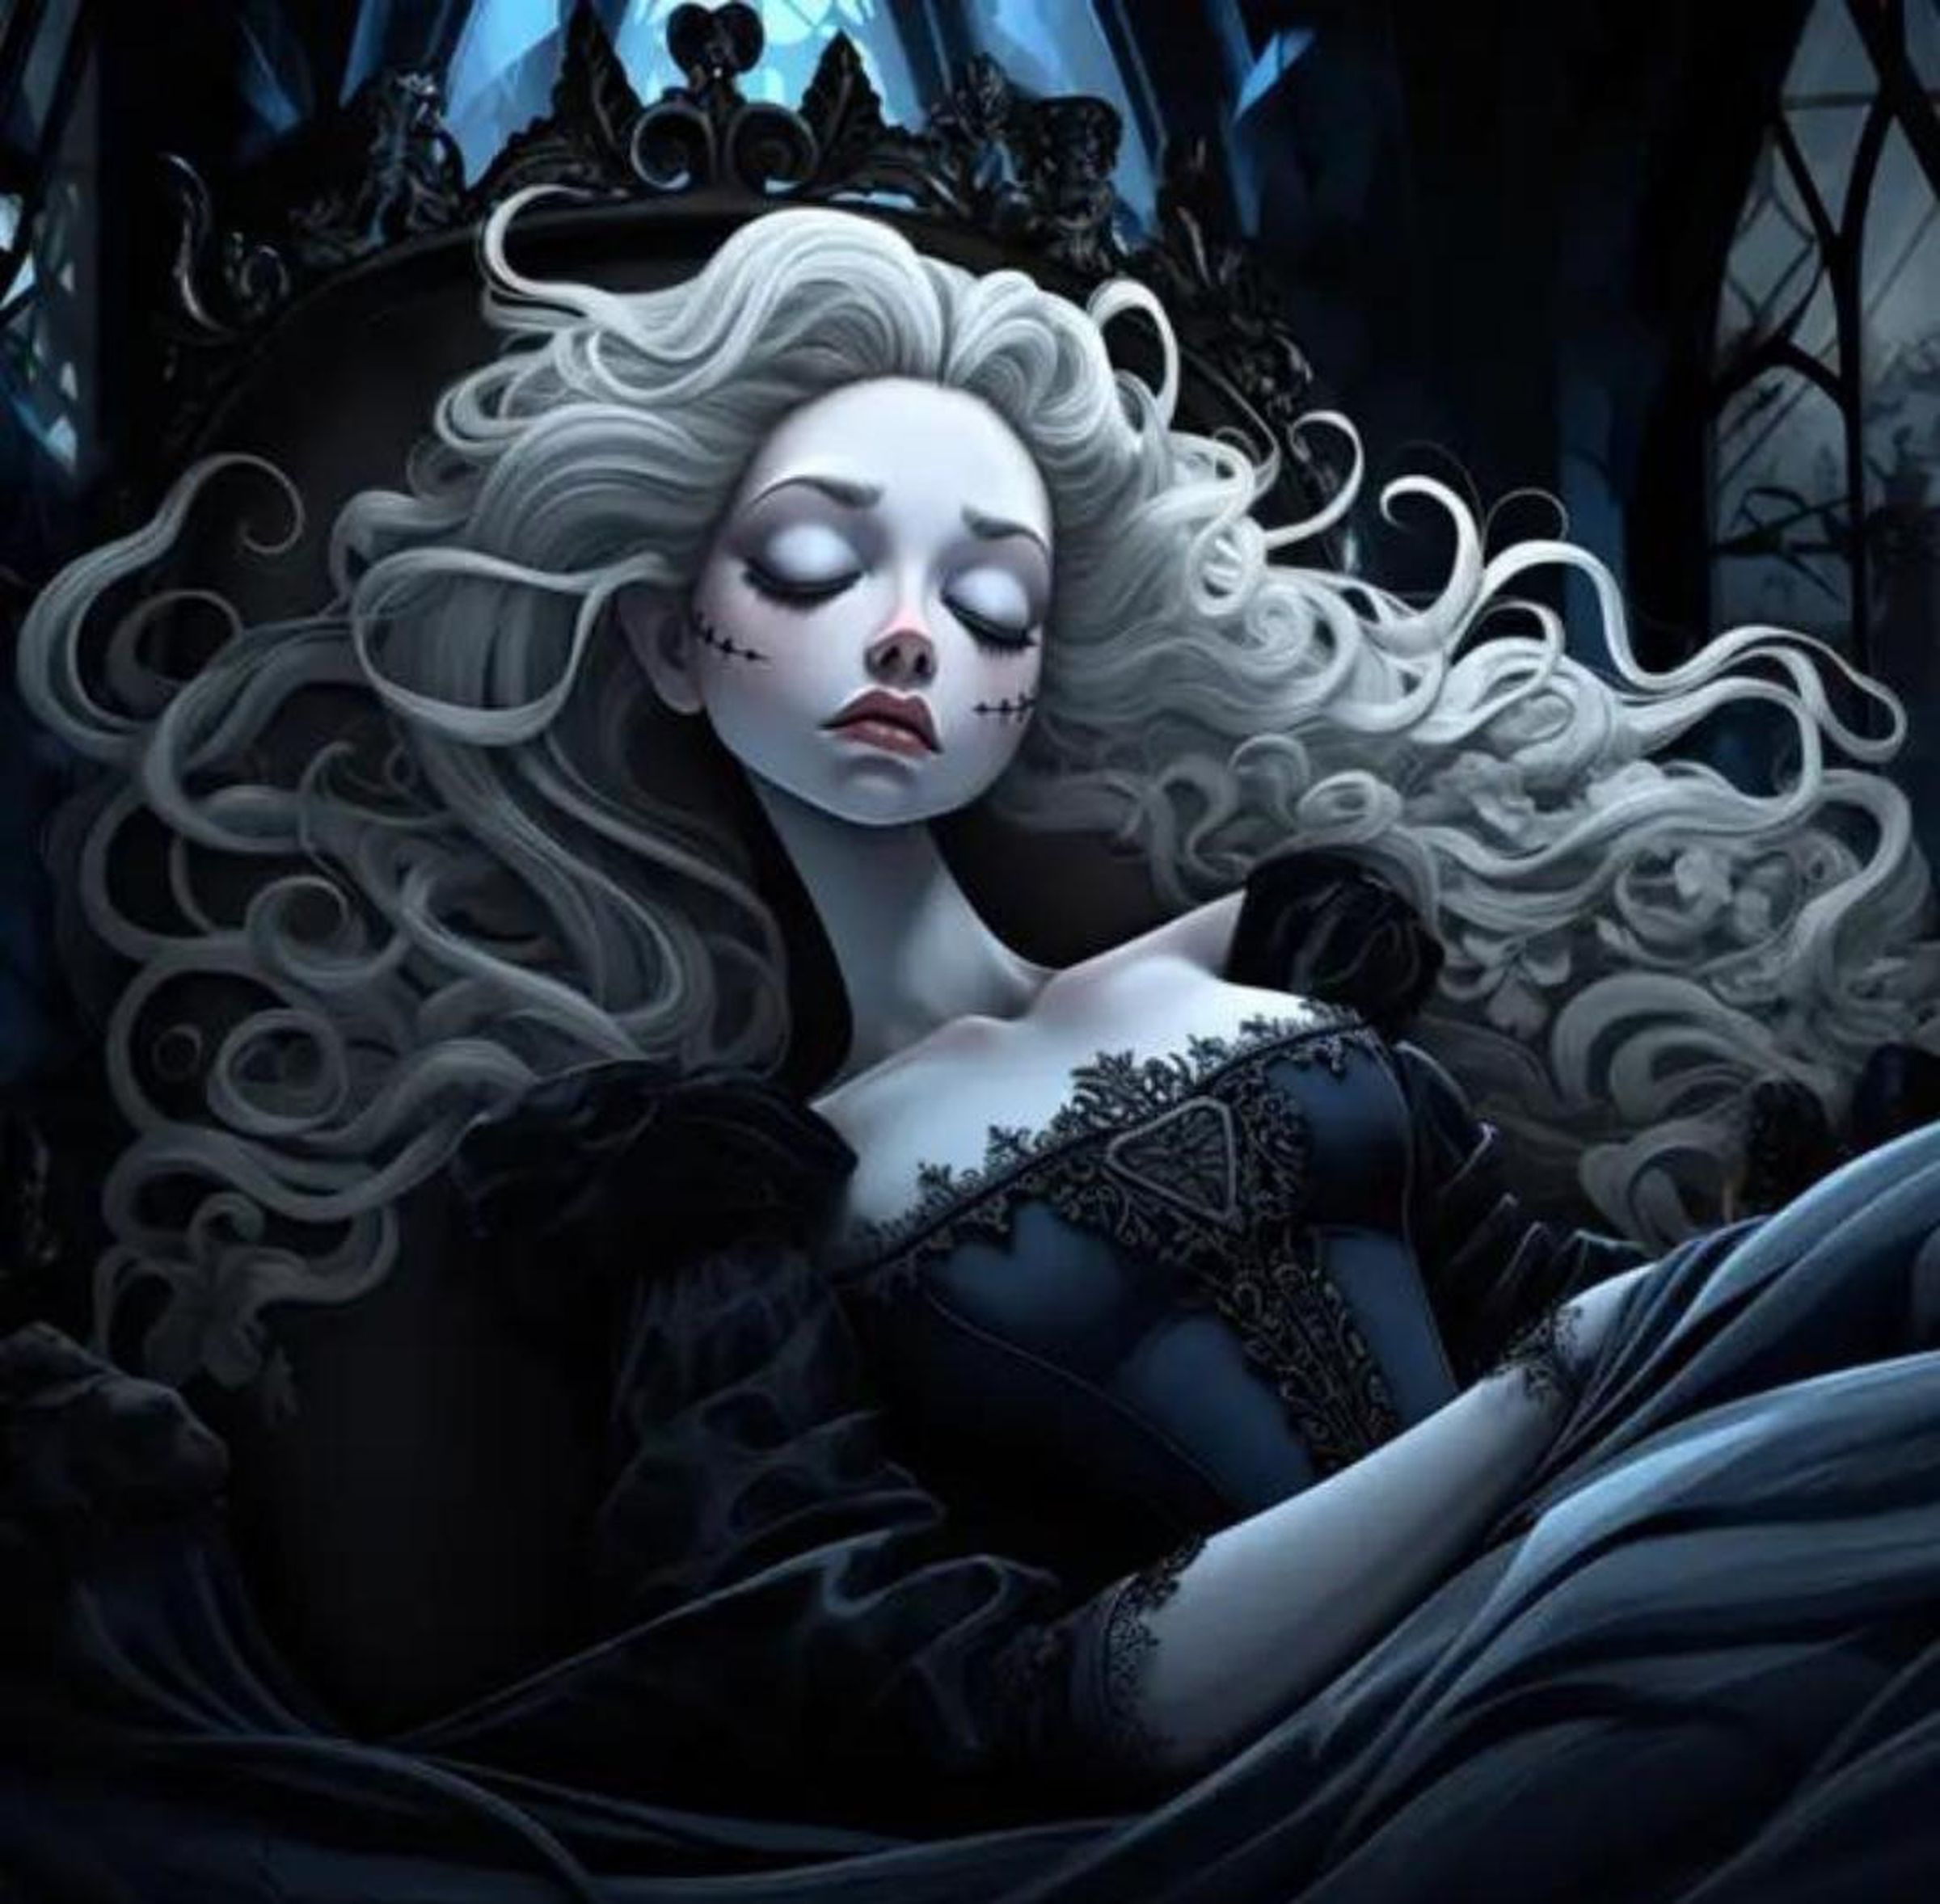 An AI-generated image of Sleeping Beauty in Tim Burton’s style.